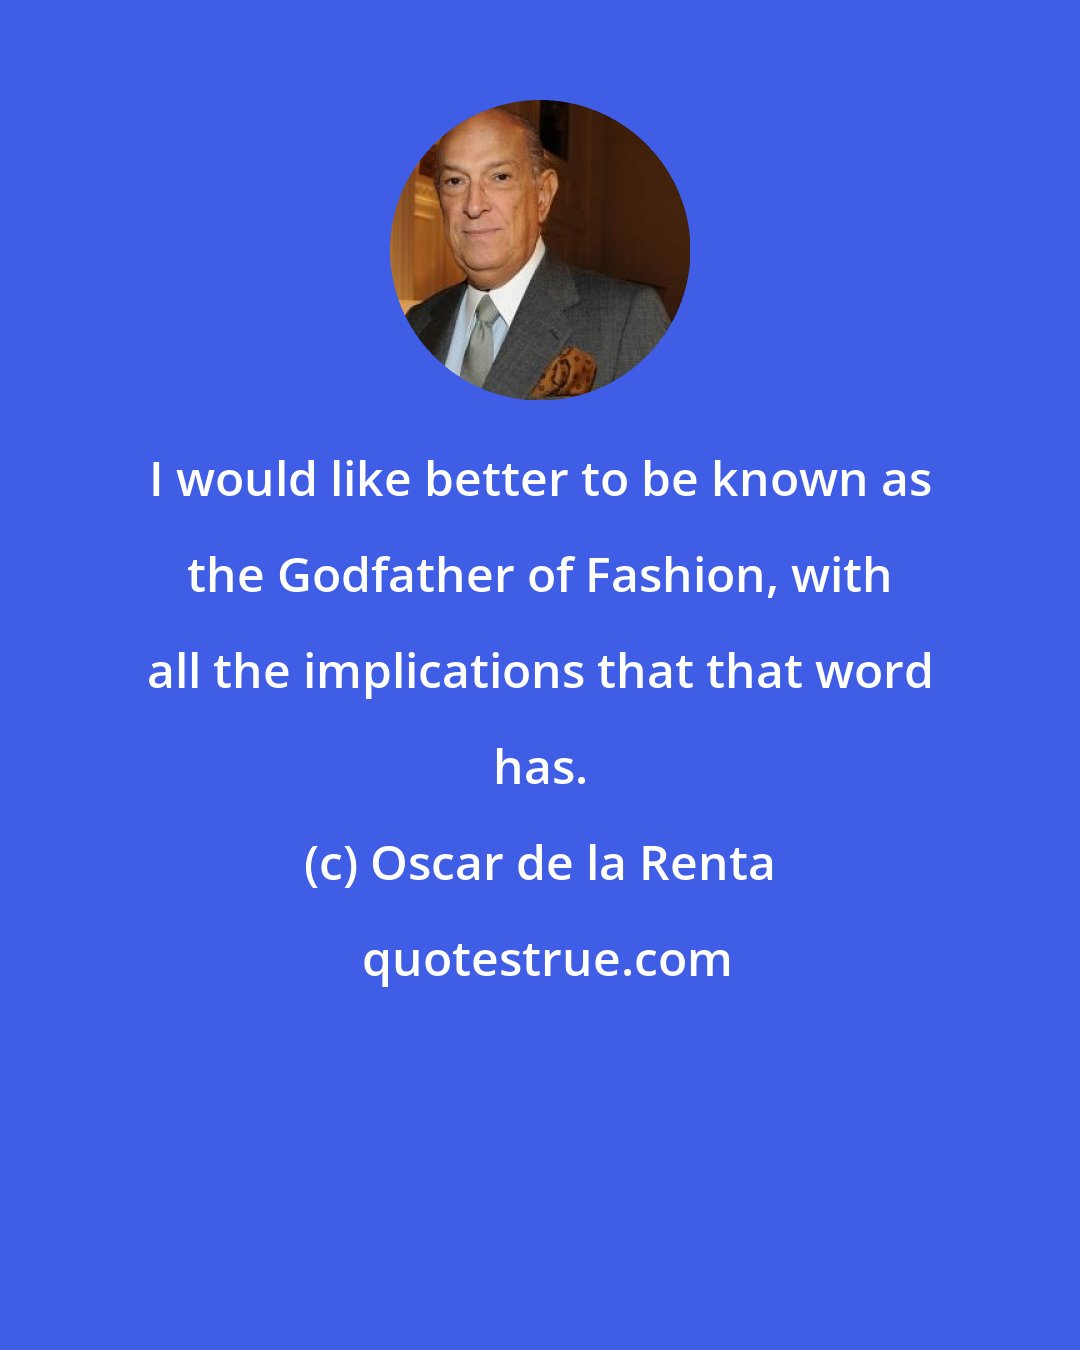 Oscar de la Renta: I would like better to be known as the Godfather of Fashion, with all the implications that that word has.